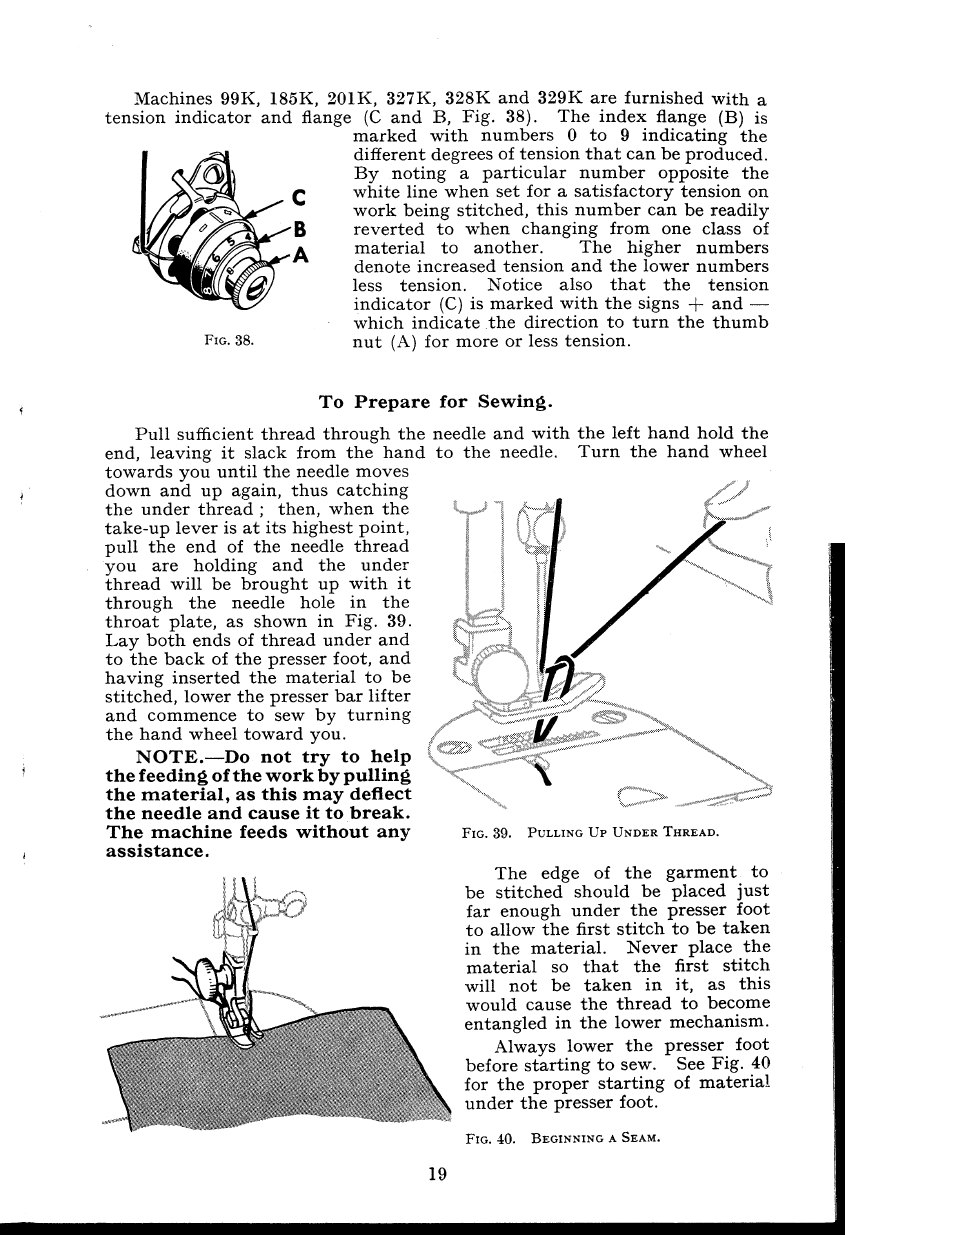 To prepare for sewing | SINGER 404K User Manual | Page 19 / 78